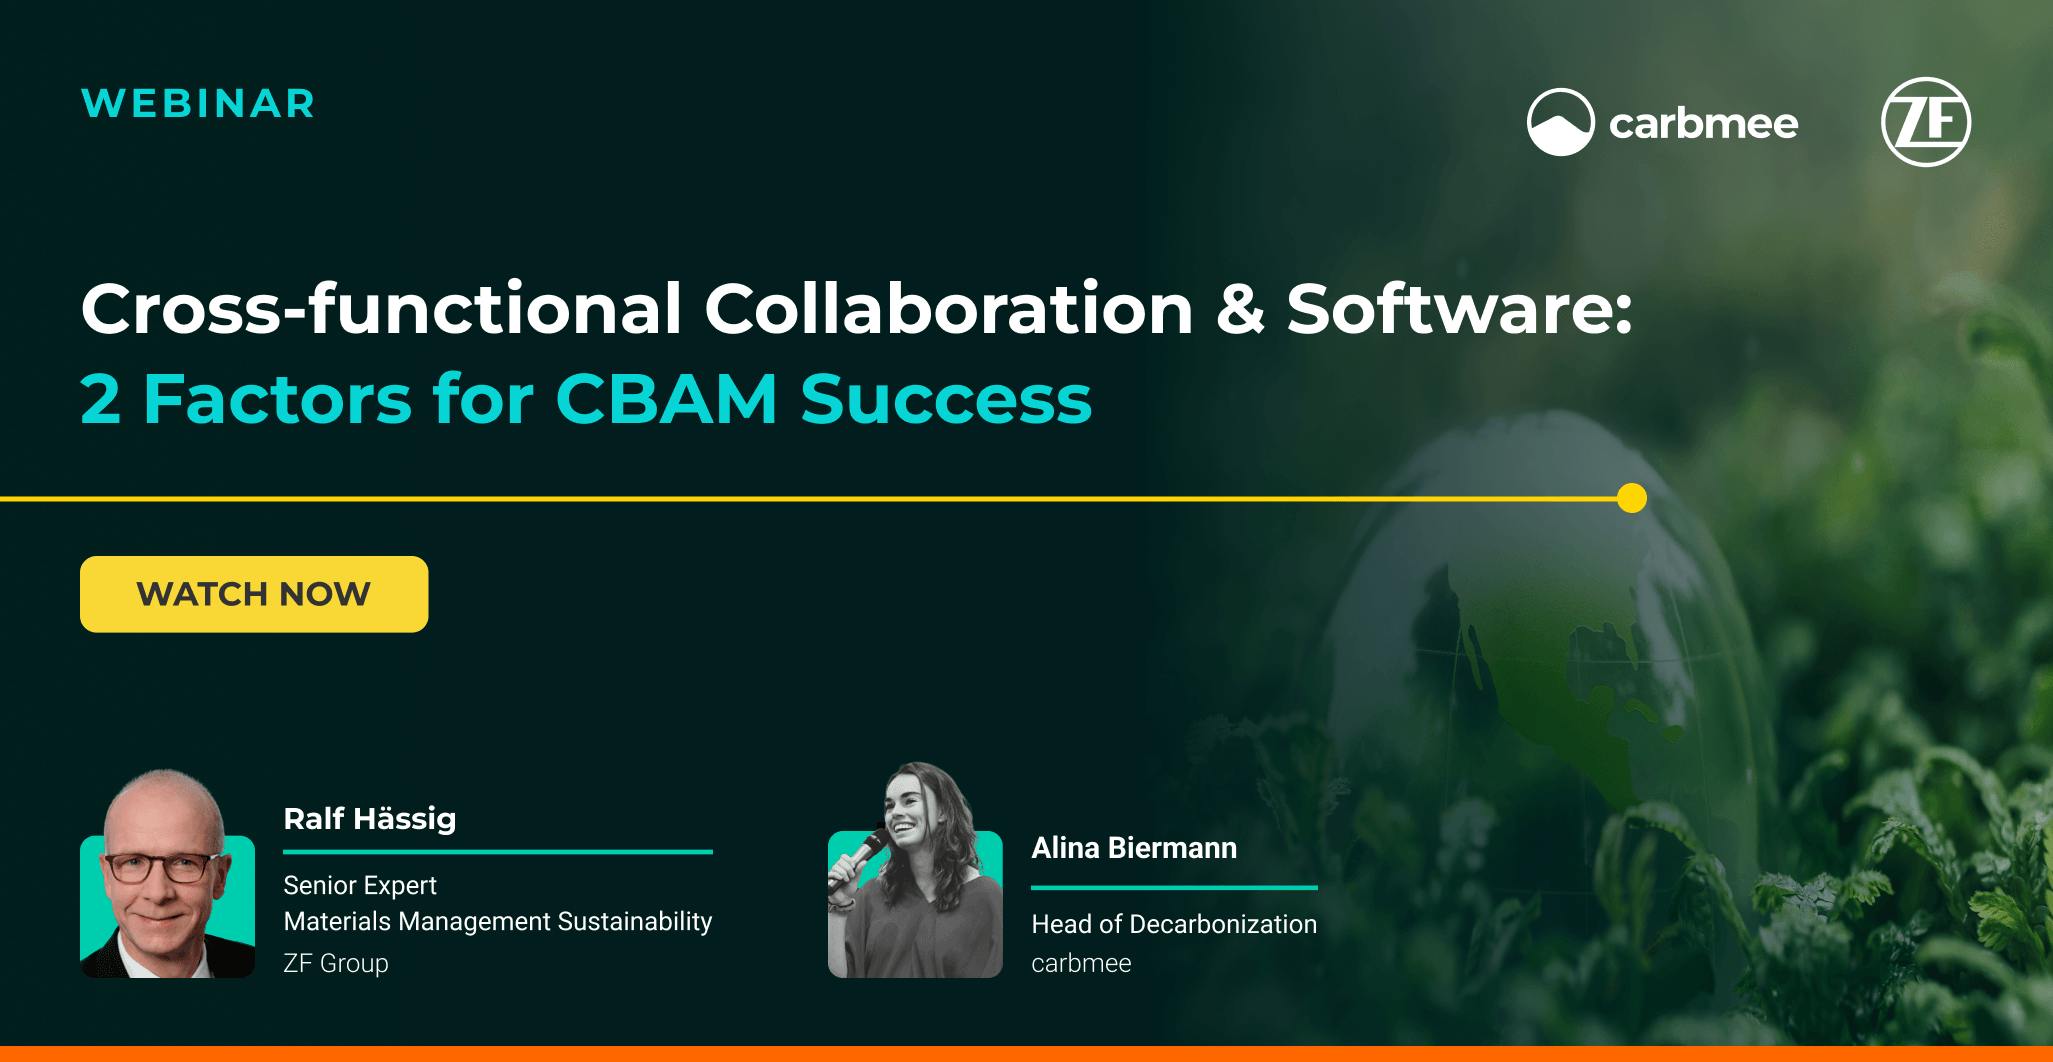 Cross-functional Collaboration & Software - 2 Factors for CBAM Success